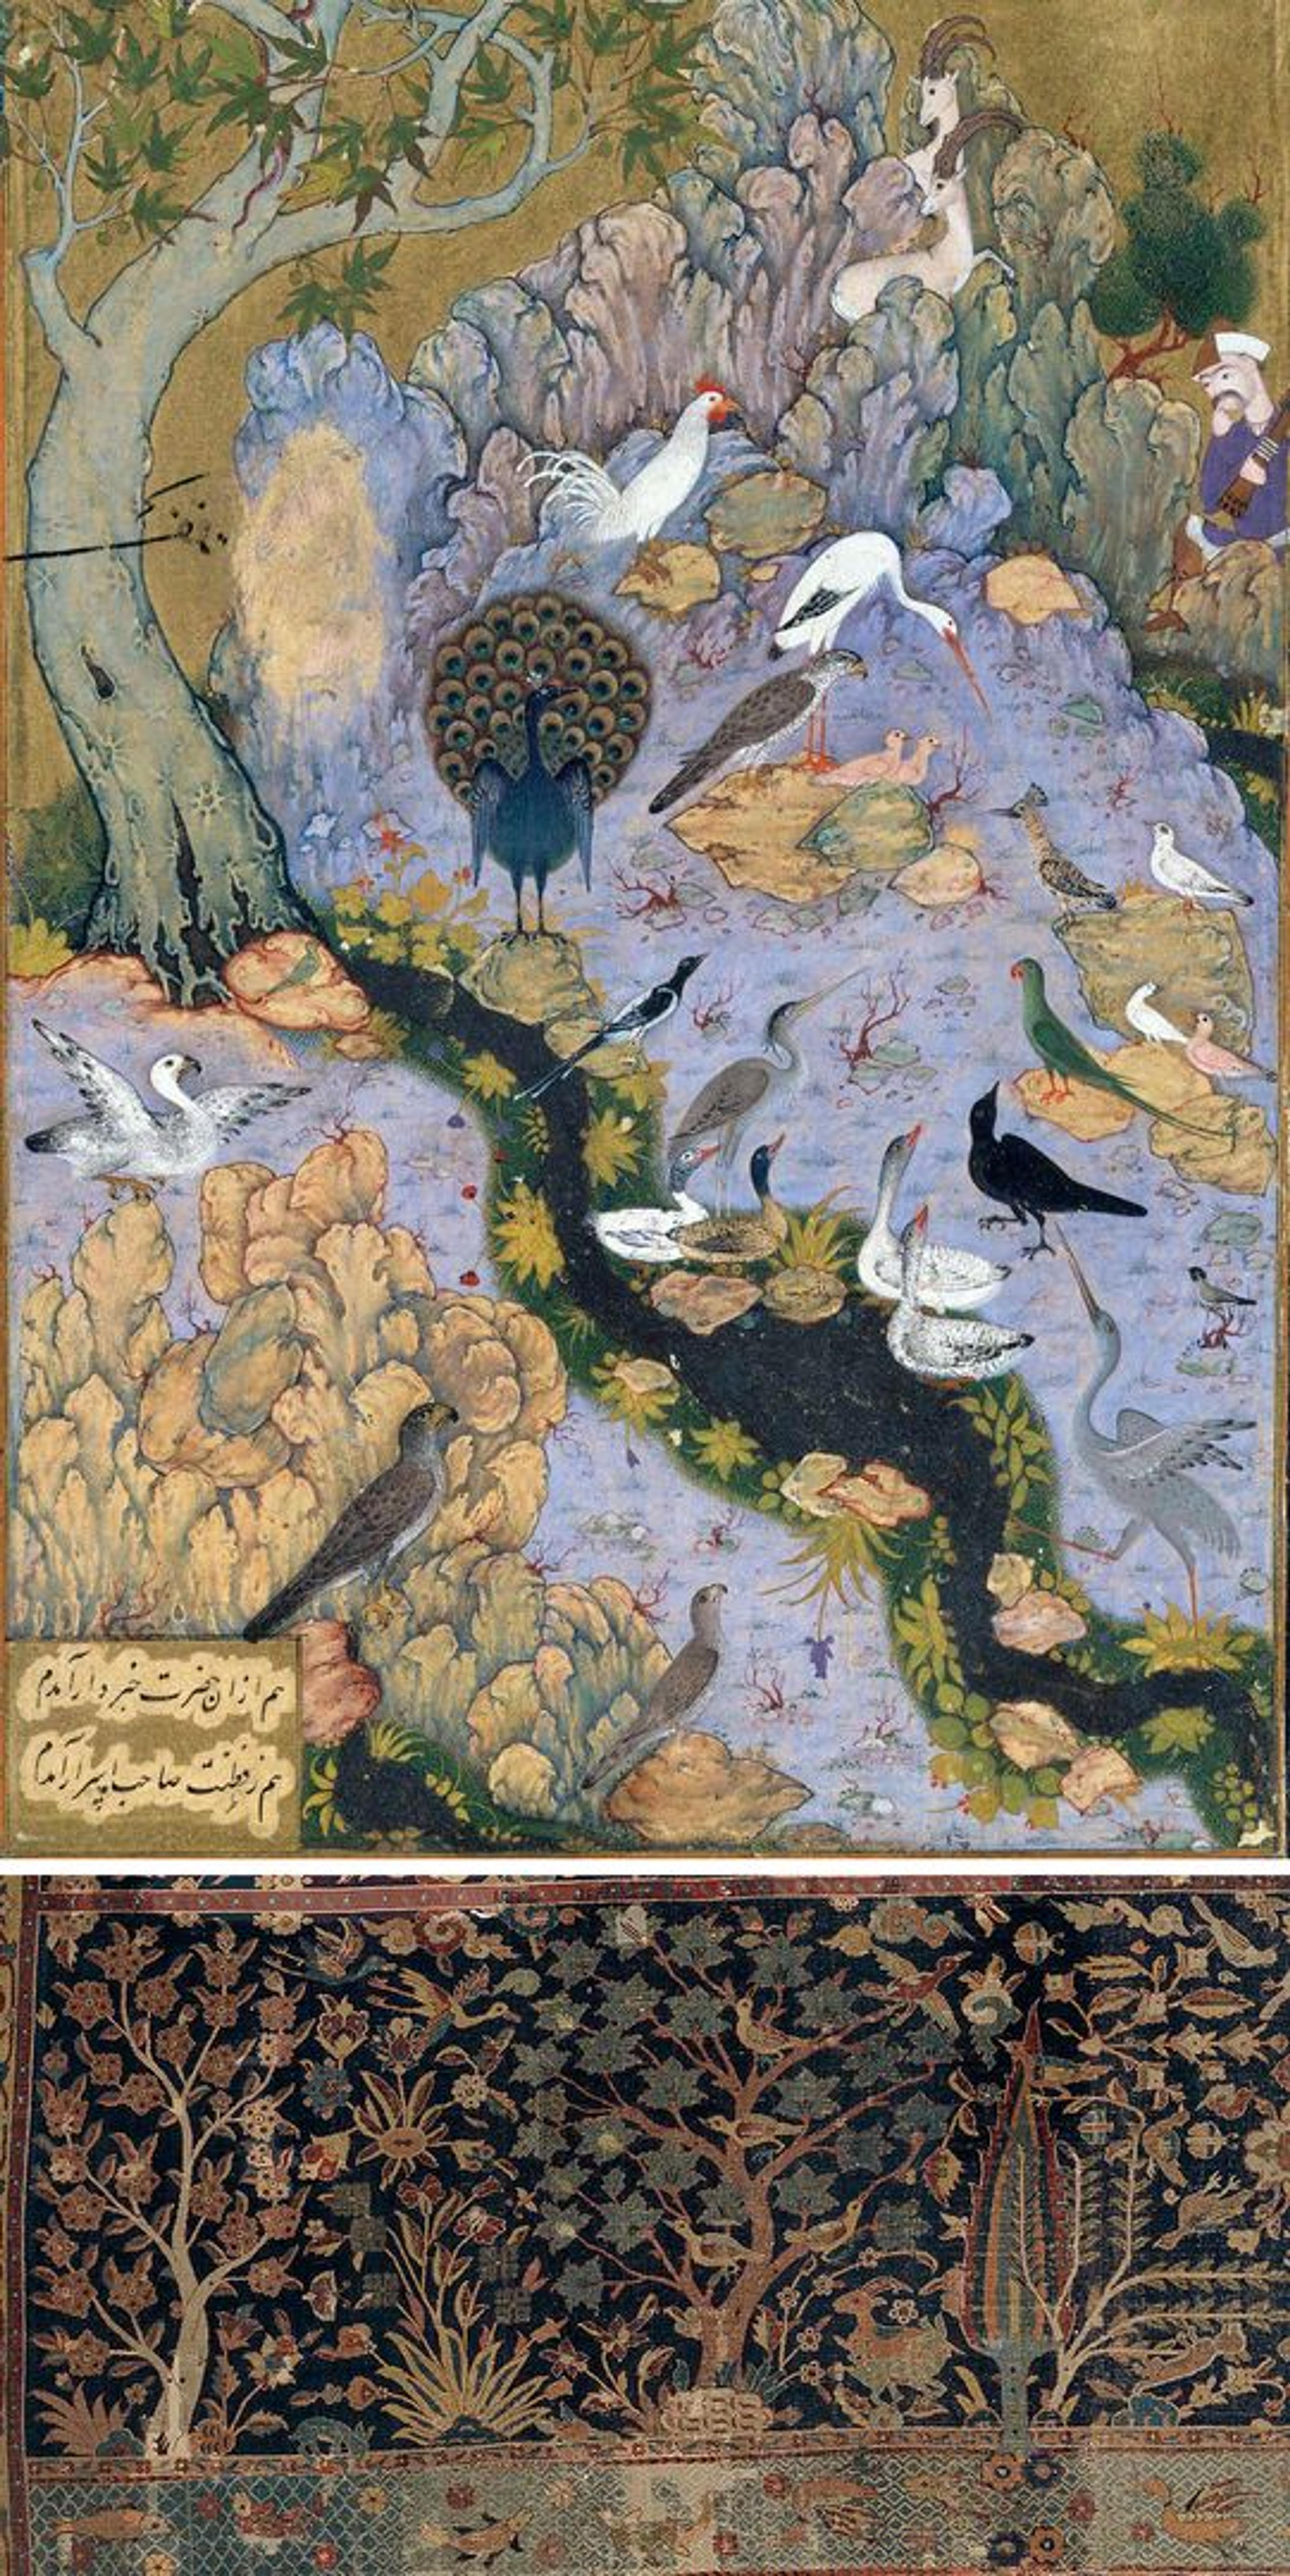 Illustrated manuscript showing conference of birds and detail of birds from carpet